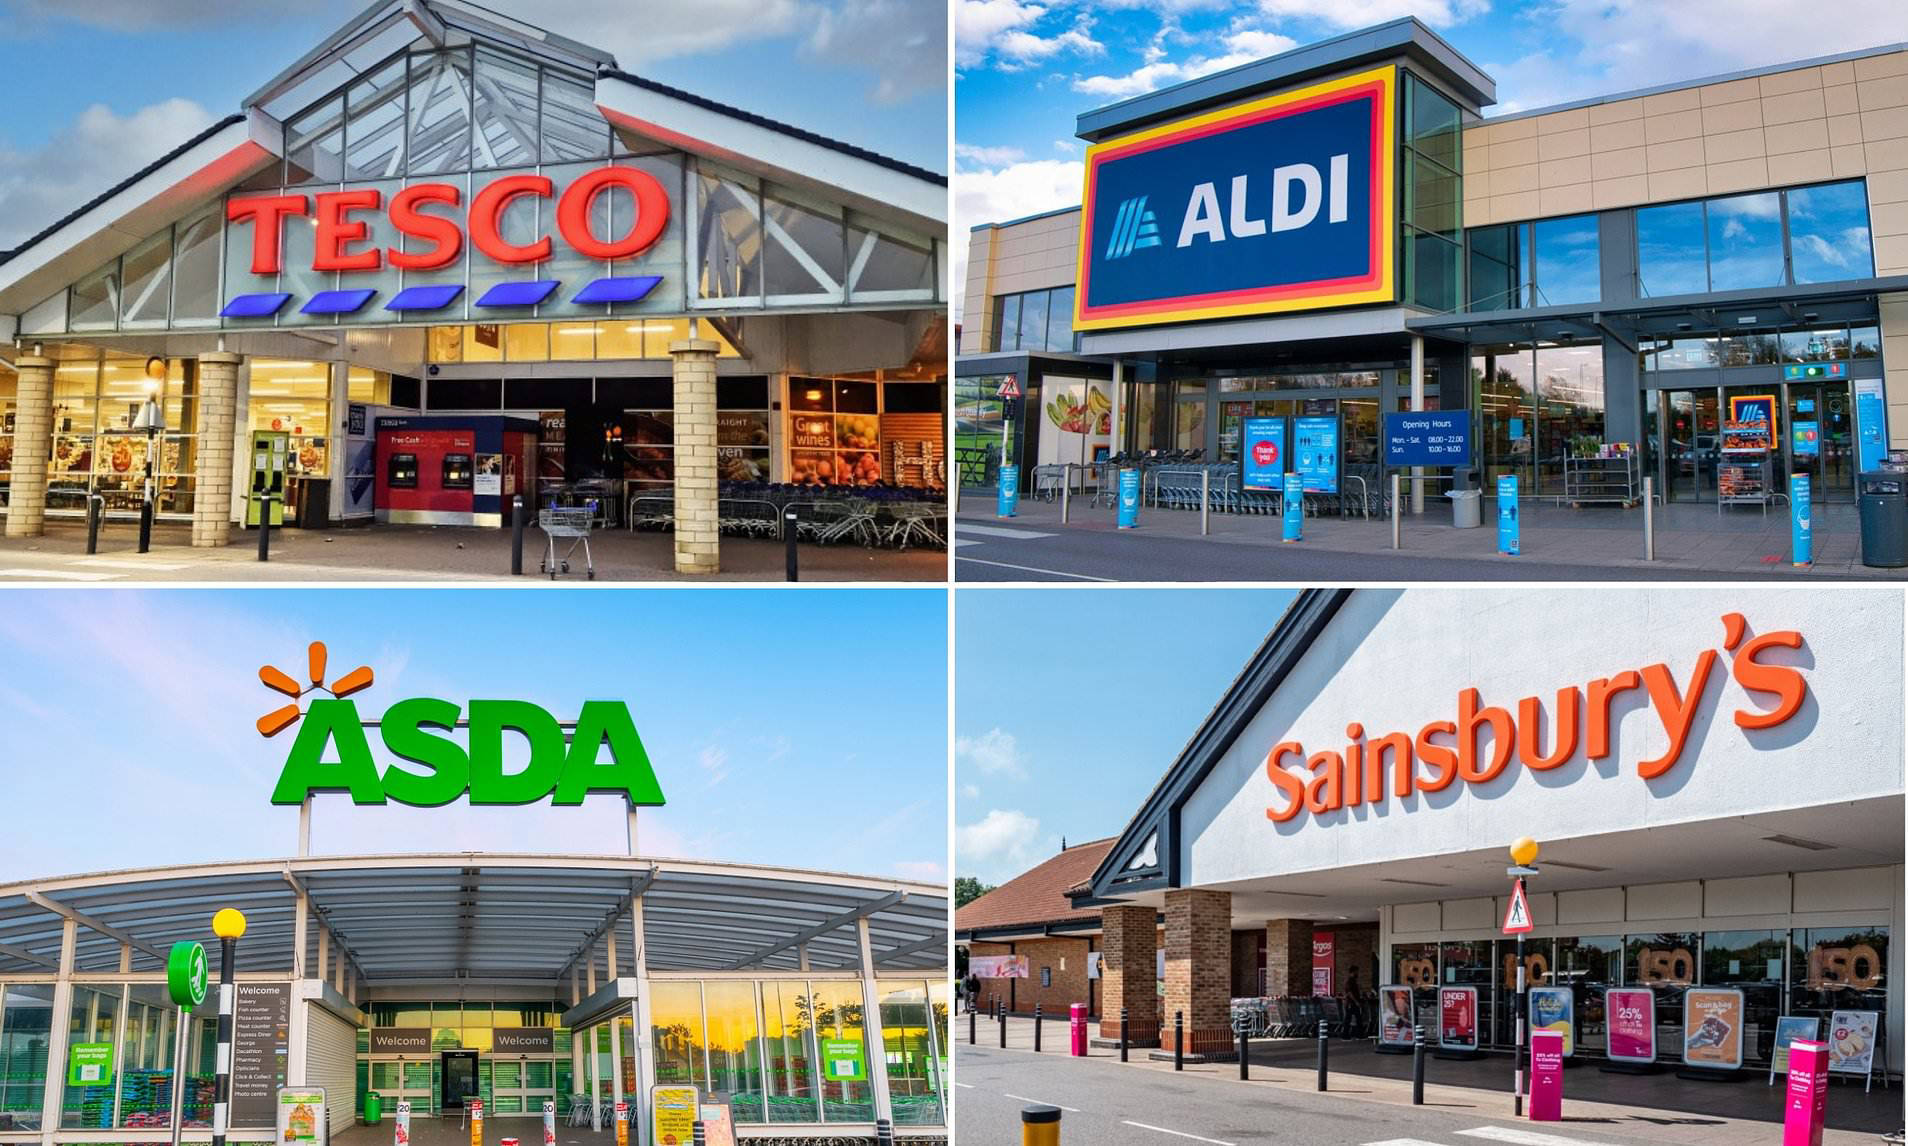 Full list of Easter bank holiday opening hours for major supermarkets